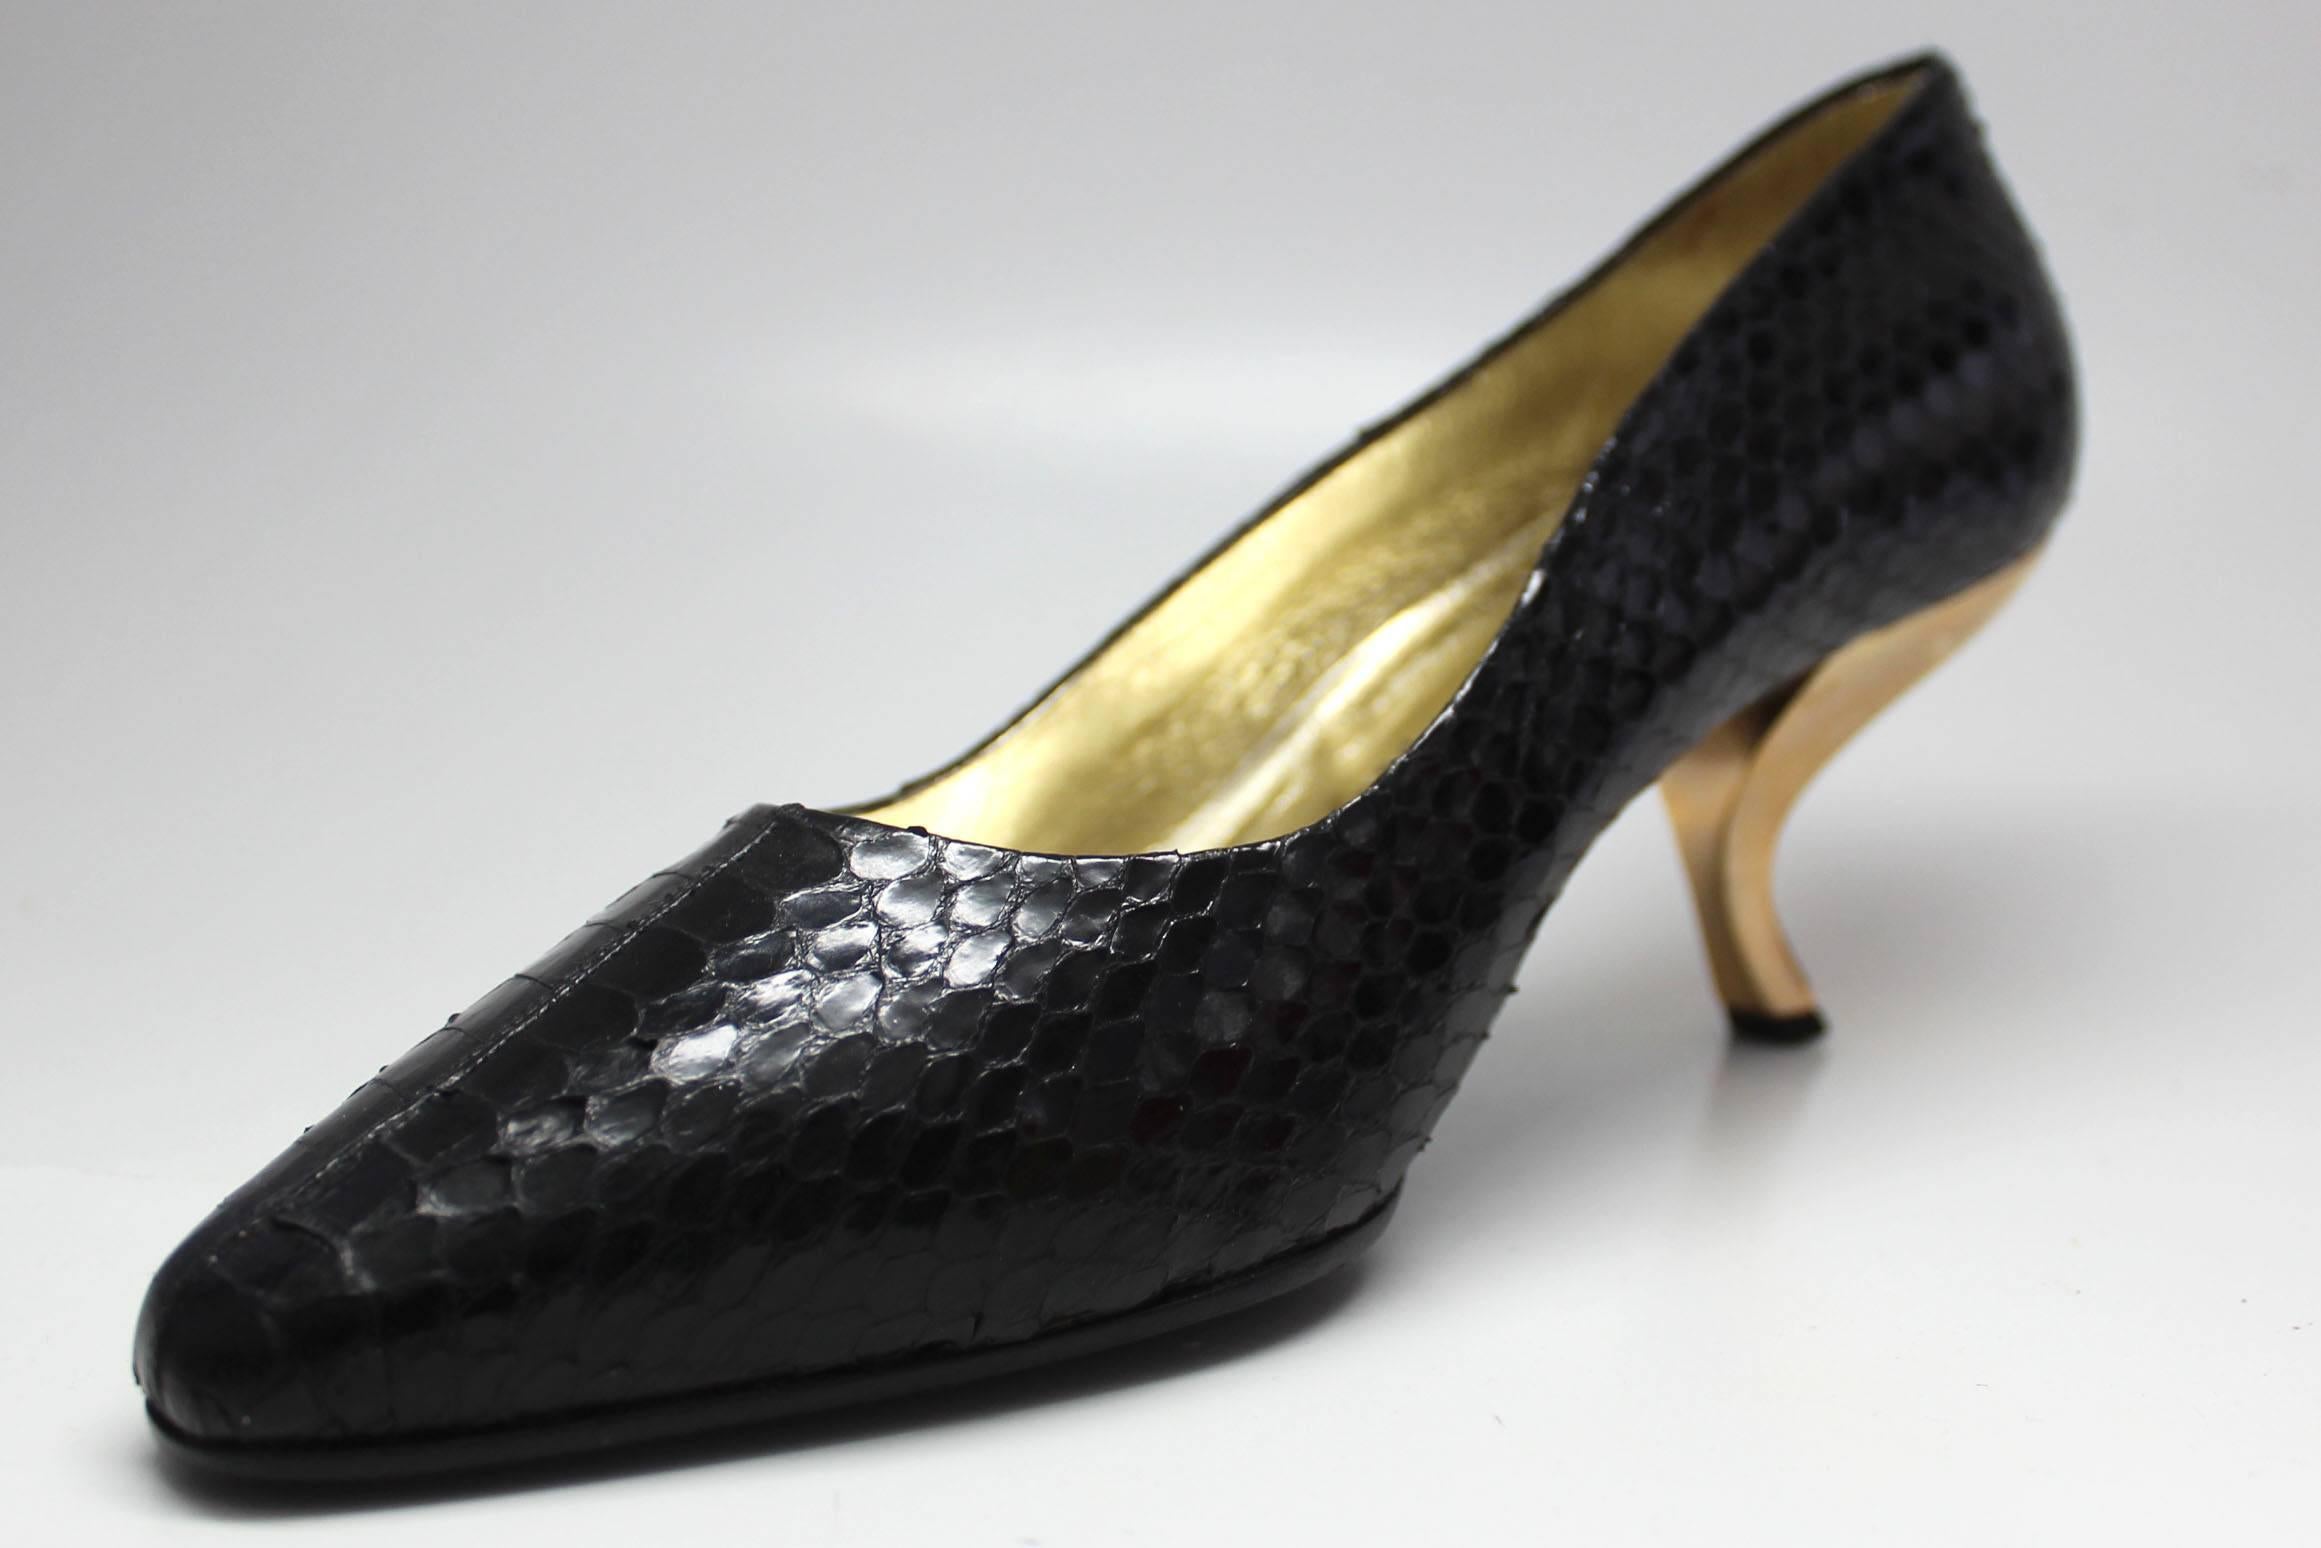 Roger Vivier Comma or 'Virgule' Heel in Black Lizard In Excellent Condition For Sale In New York, NY